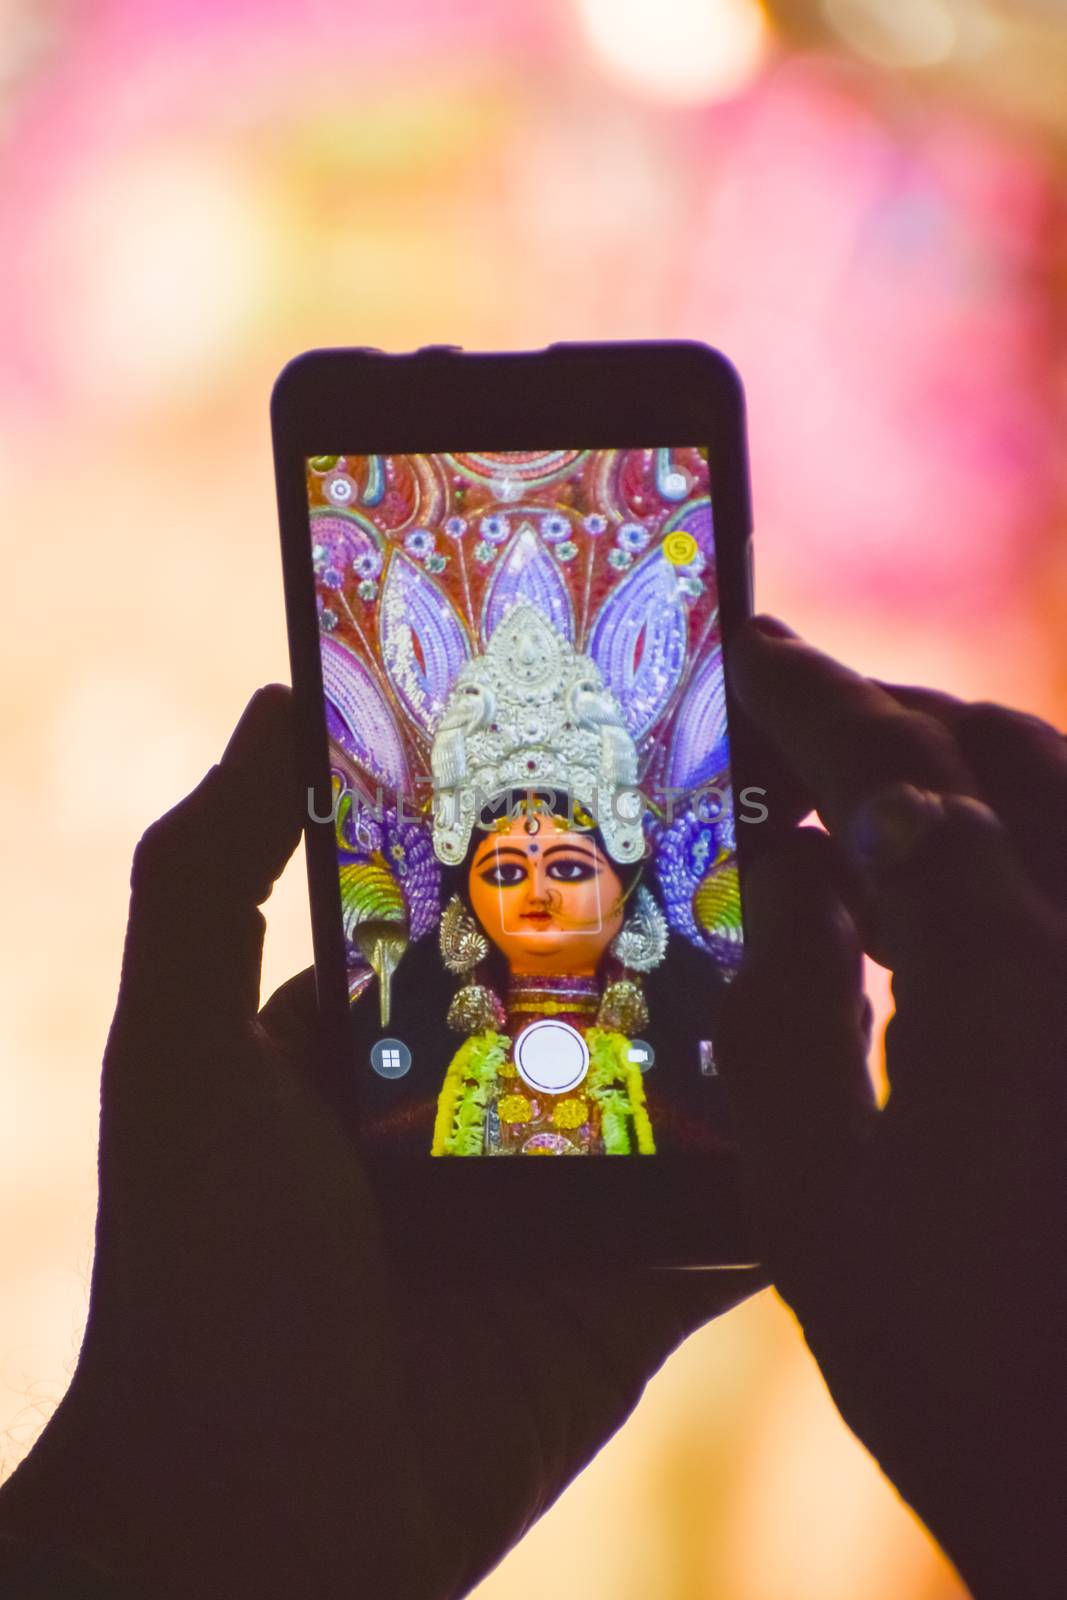 Capturing photograph of Durga Idol with Mobile phone during durga puja festival in kolkata. by sudiptabhowmick